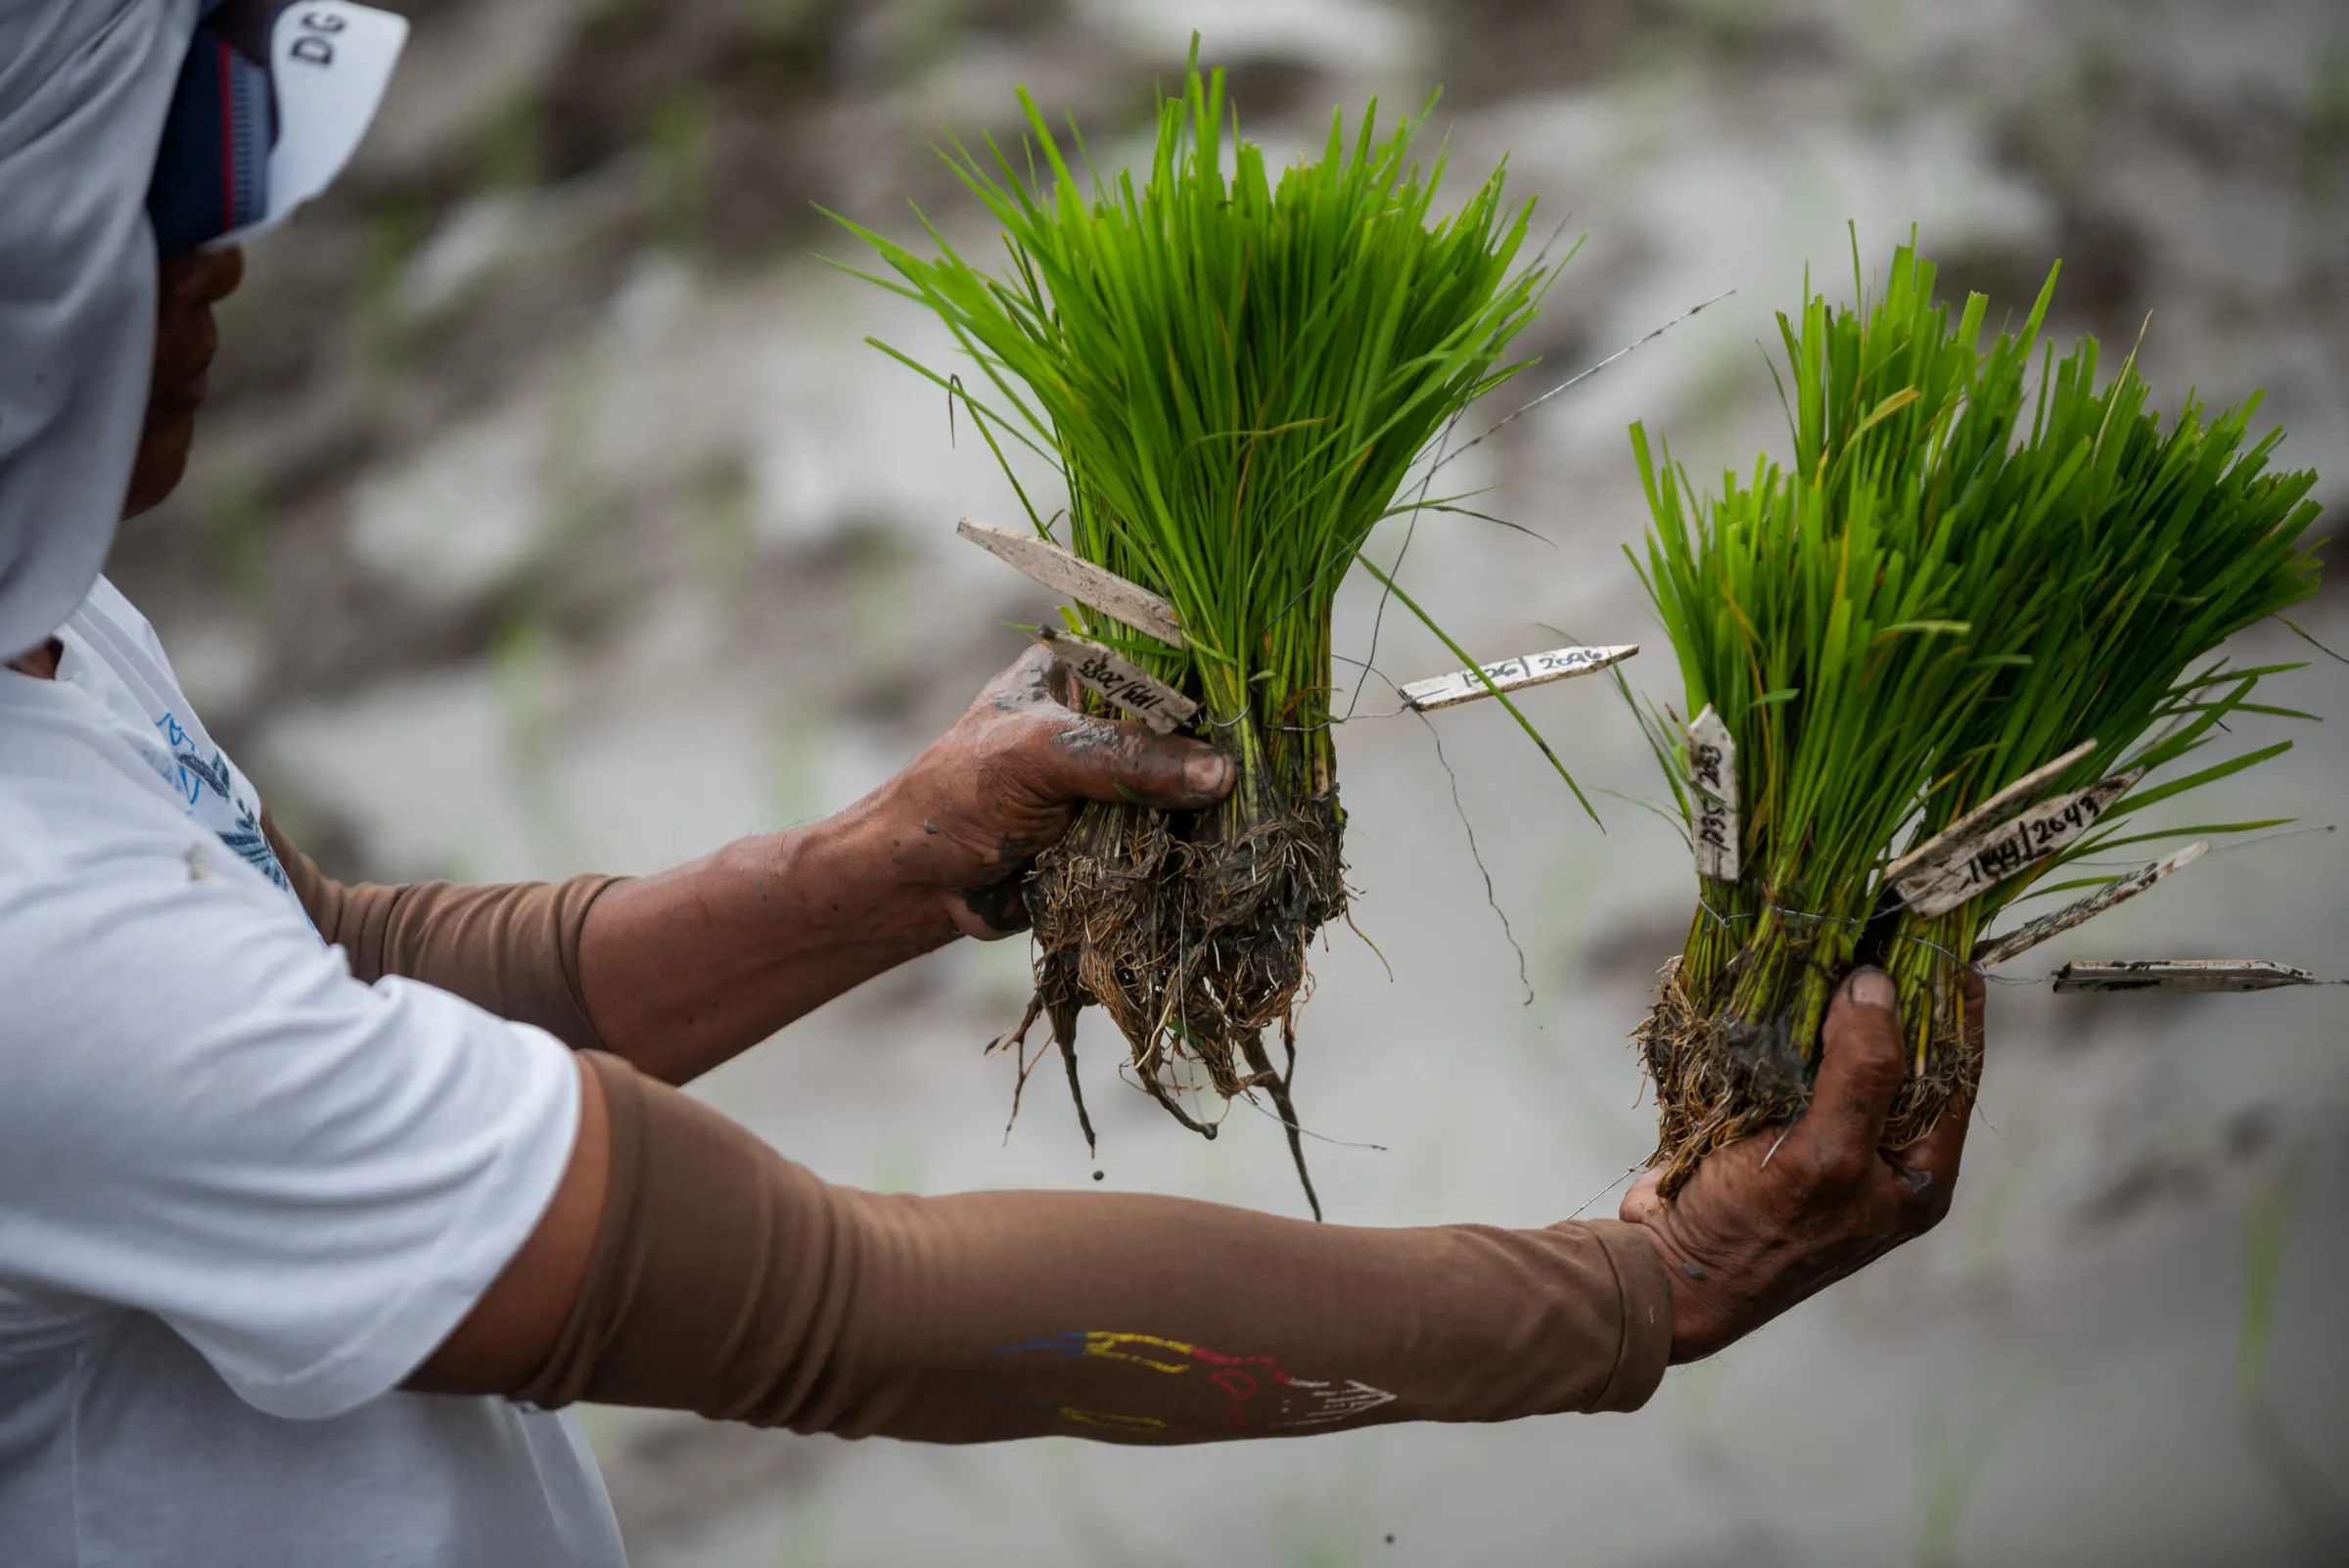 A farmer shows rice seedlings that are part of a breeding program for late-maturing varieties, at the International Rice Research Institute, in Los Banos, Laguna province, Philippines, January 18, 2023. REUTERS/Lisa Marie David